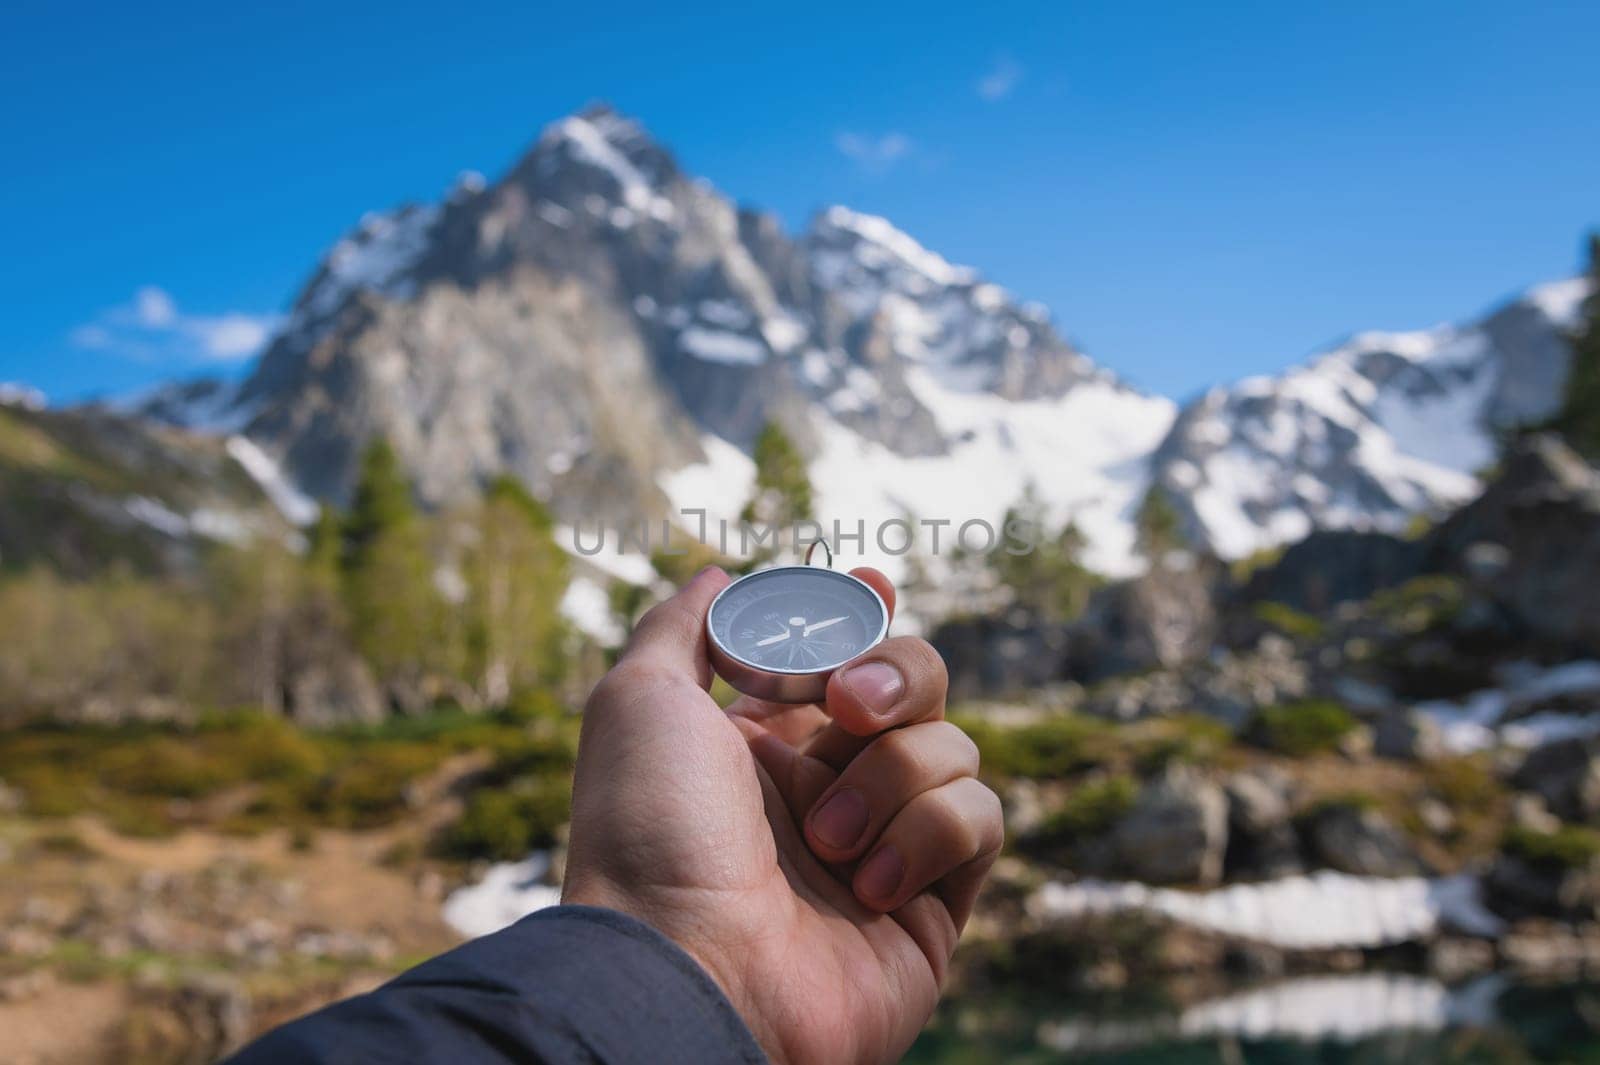 Snow-capped mountains and a tourist hand with an old metal compass in the foreground. Nature reserve, landscape photography.